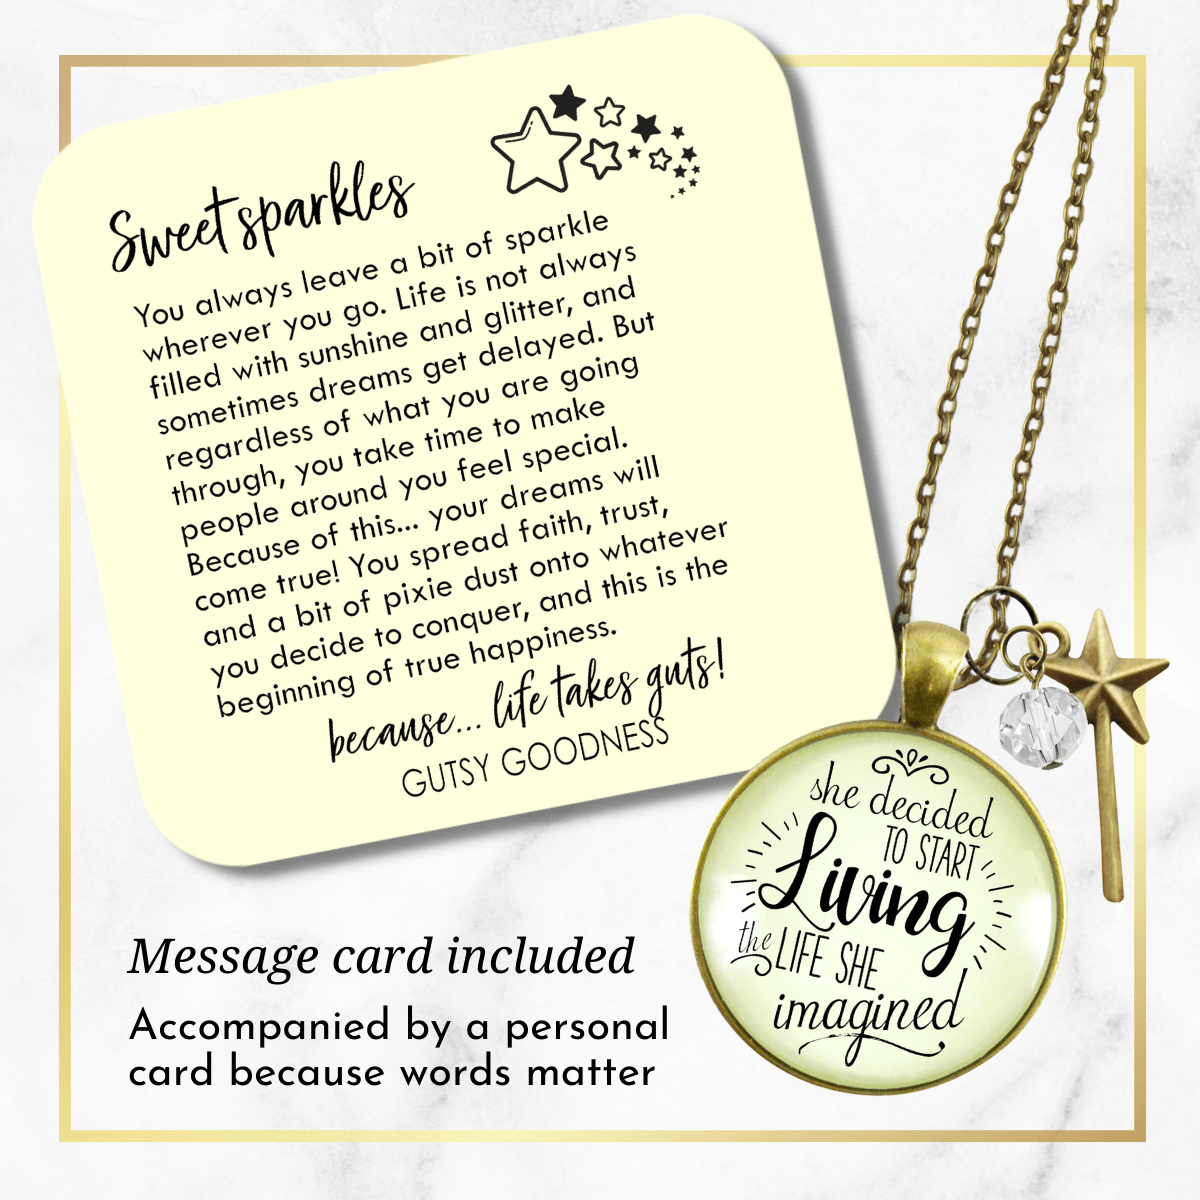 Gutsy Goodness Choice Necklace She Decided Start Living Life She Imagined Women Mantra Jewelry - Gutsy Goodness;Choice Necklace She Decided Start Living Life She Imagined Women Mantra Jewelry - Gutsy Goodness Handmade Jewelry Gifts